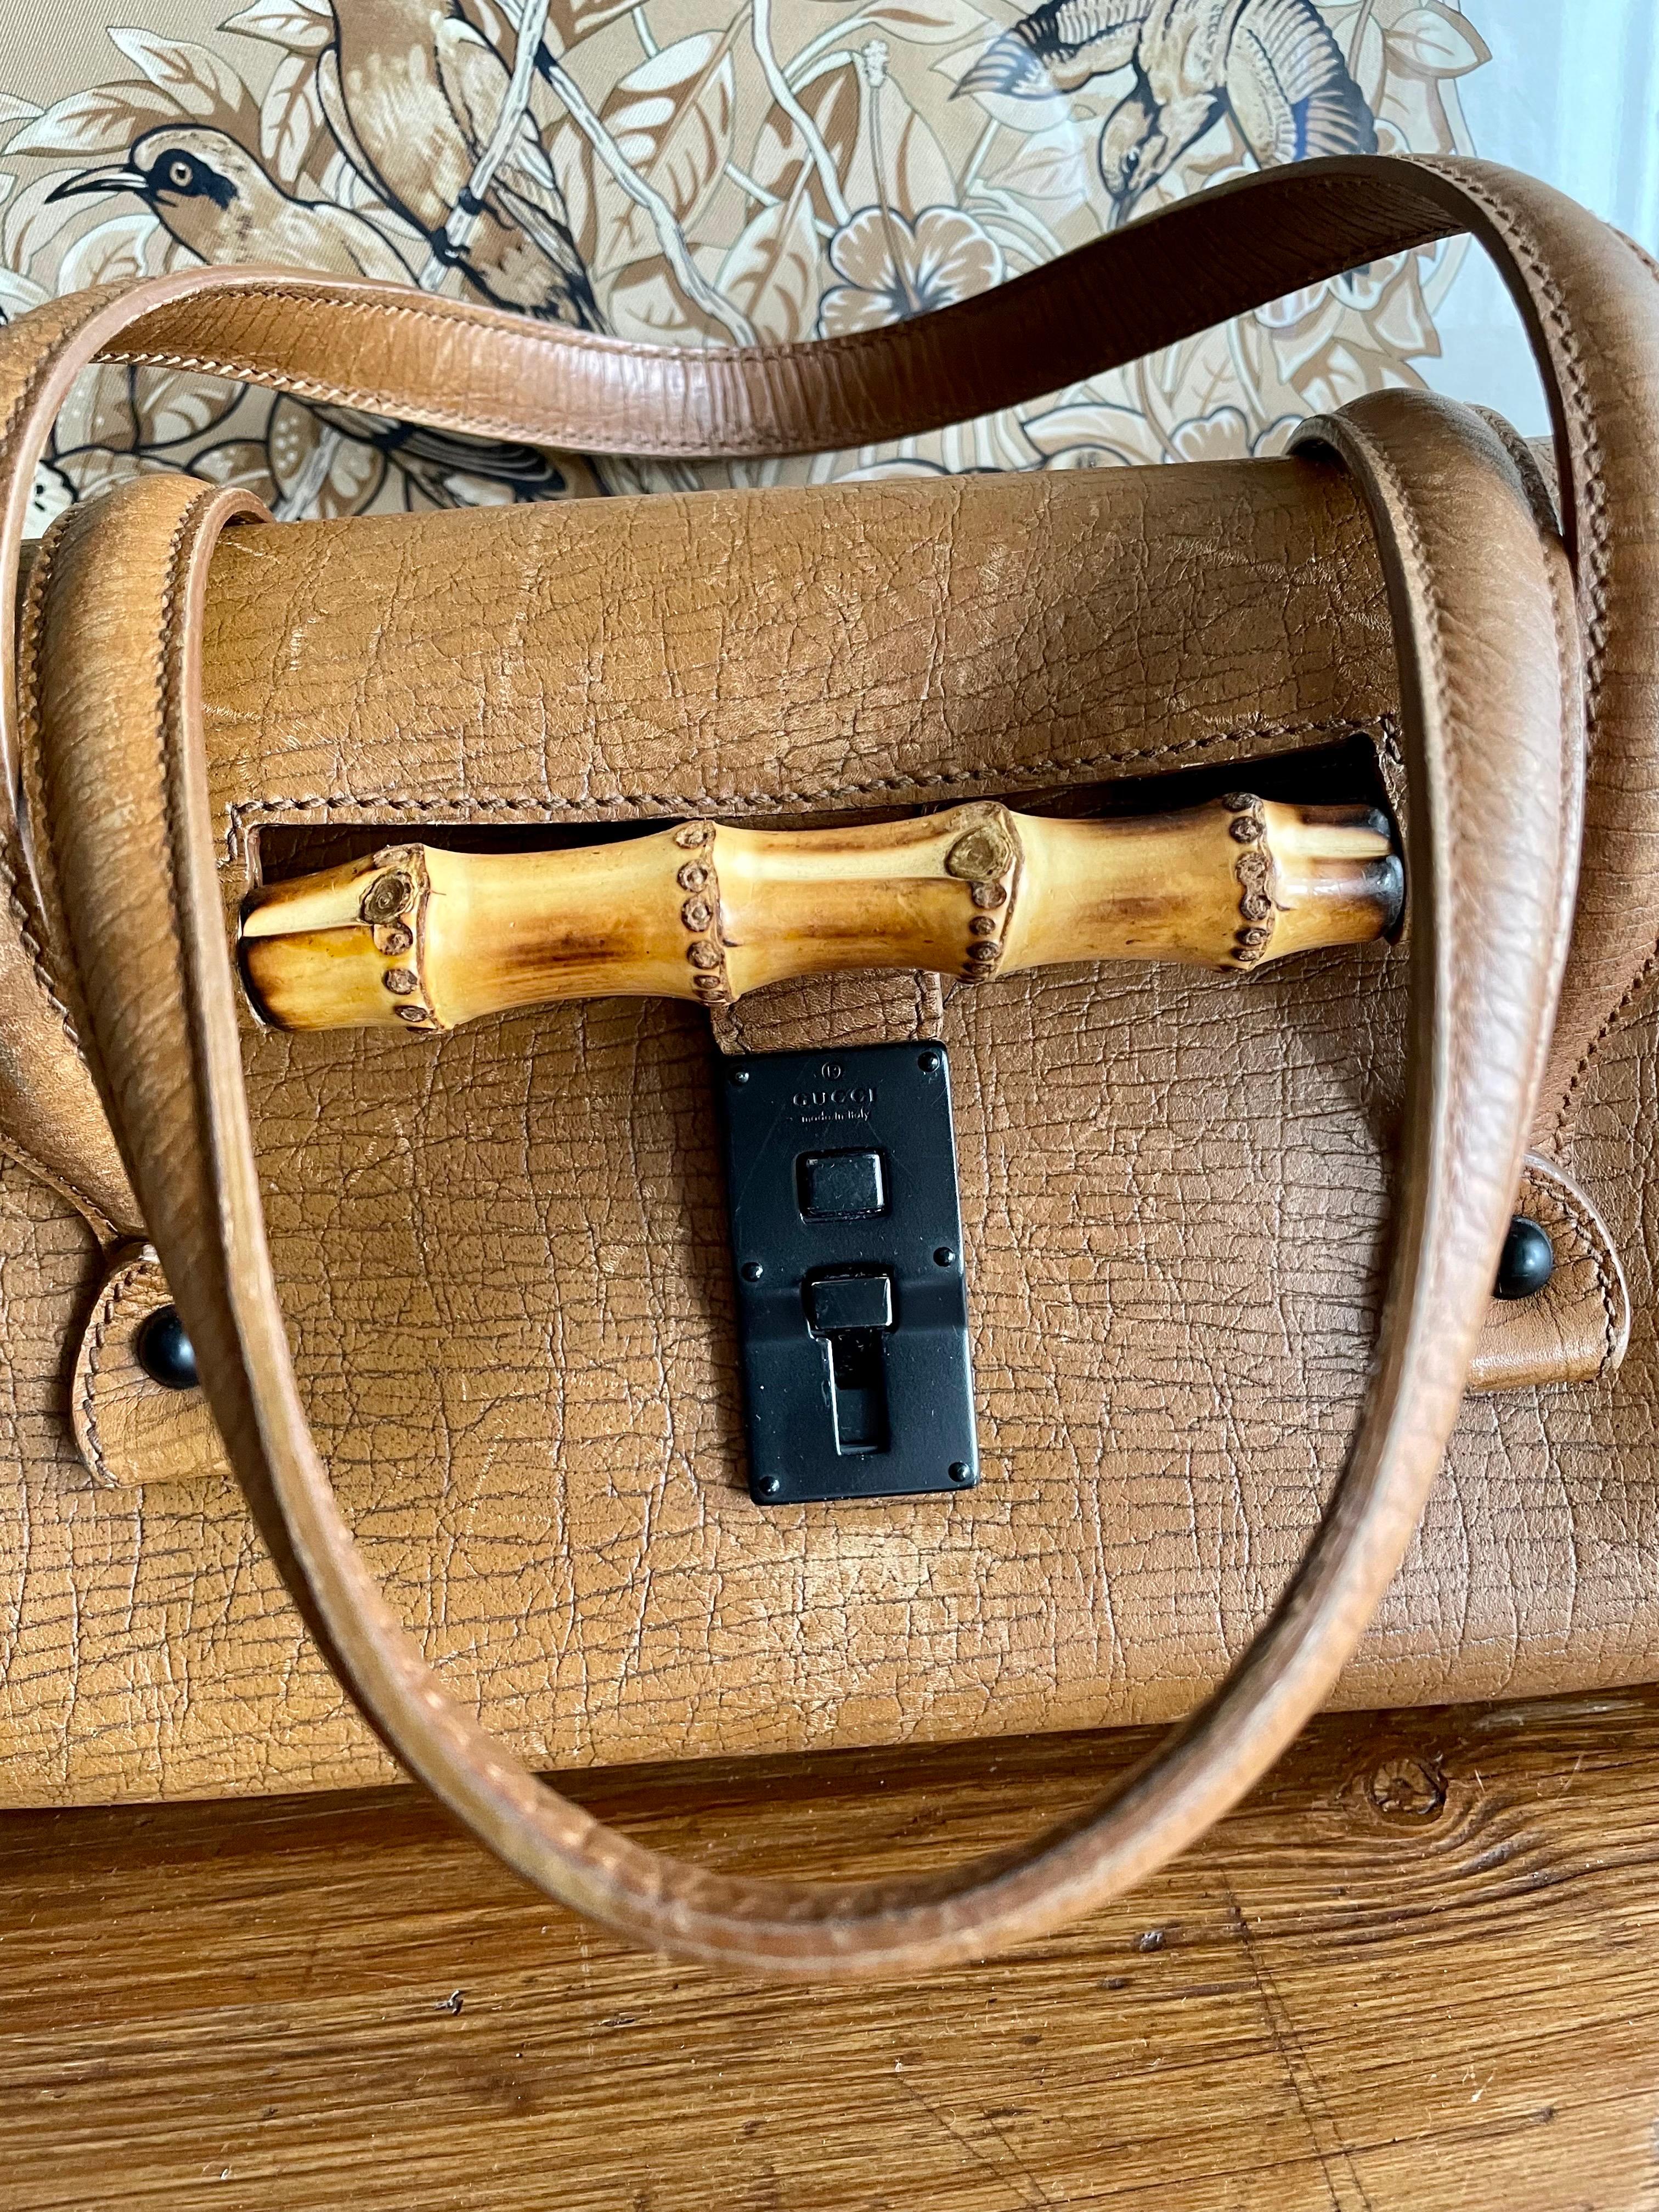 Vintage Gucci bag with bamboo detail. Brown leather with particular workmanship, particular also the closure. It has some signs of use that make it even more beautiful. Roomy interior with side pocket. 40cm wide, 17cm high, 13cm deep.